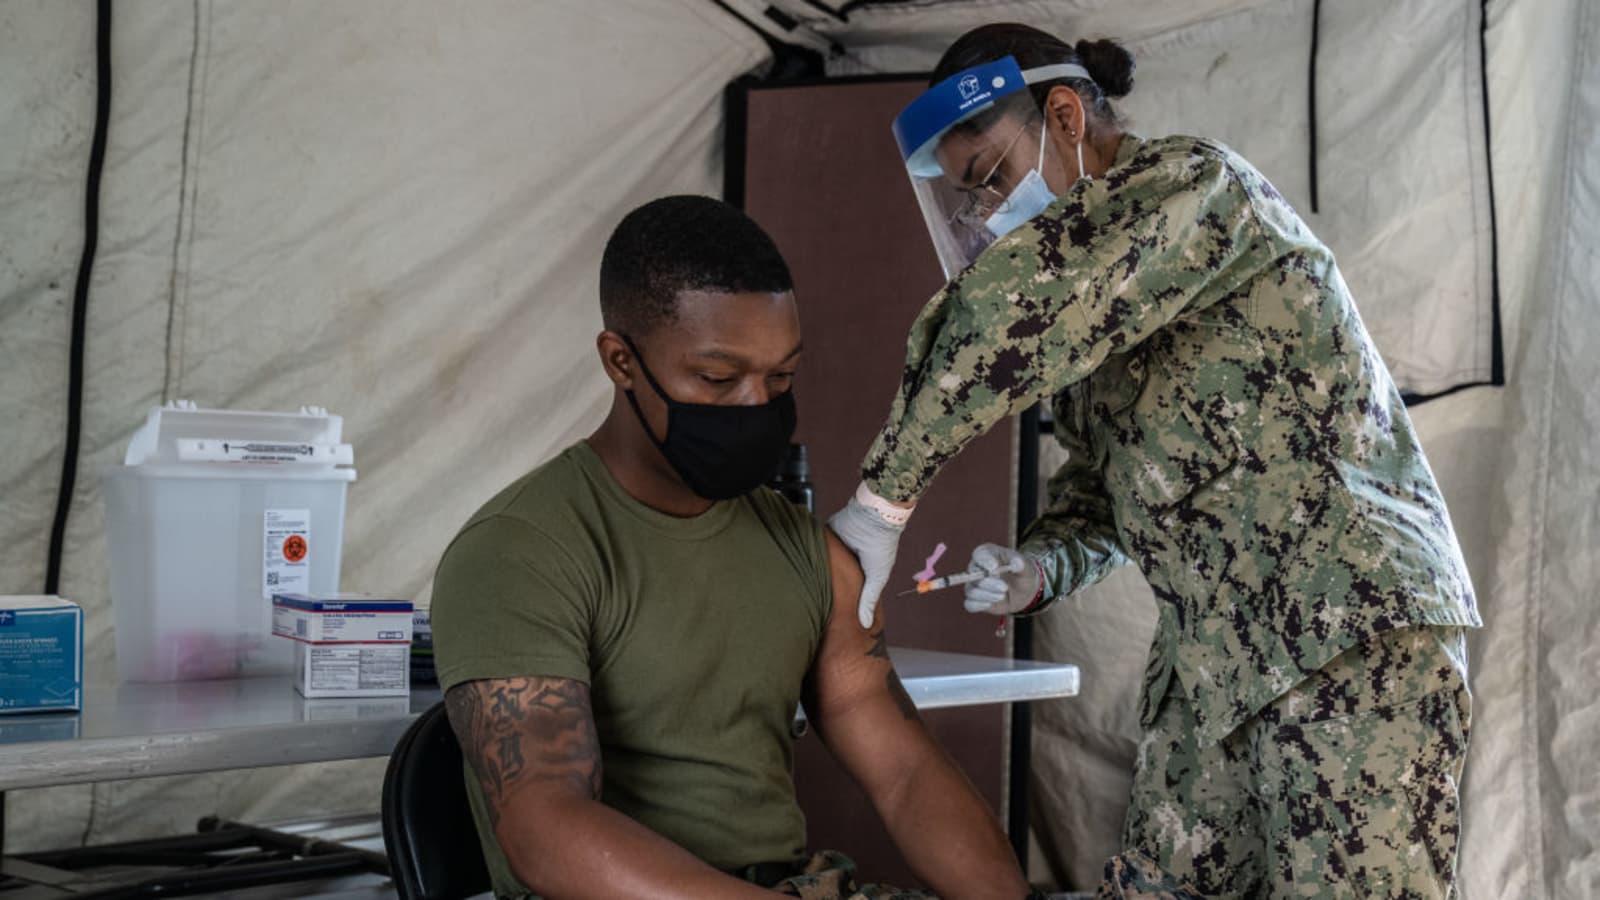 Pentagon to require all service members to get Covid vaccine by mid-September